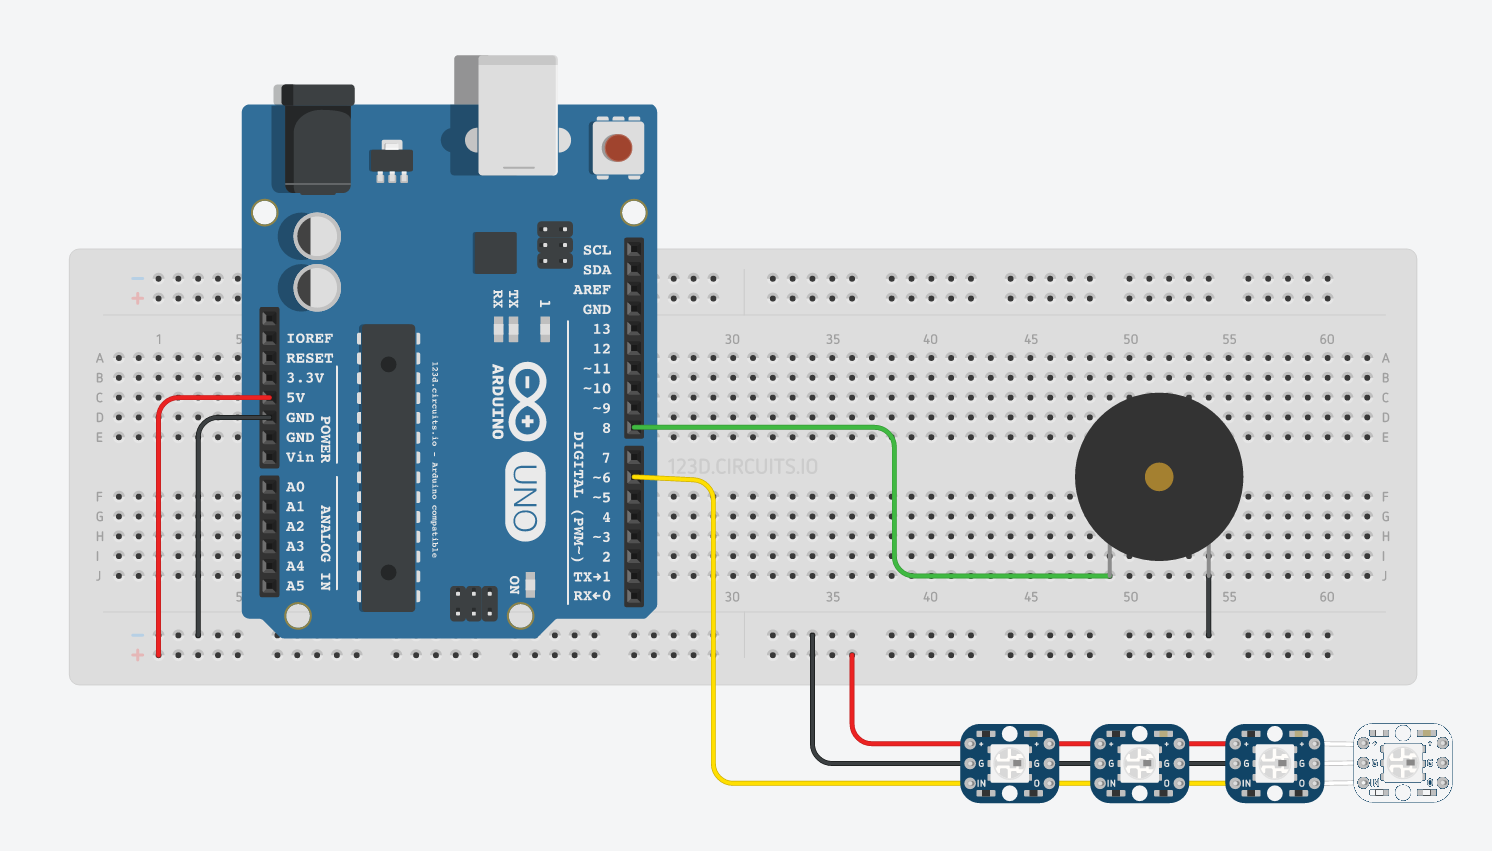 Playing around with circuits.io to describe the setup for this test